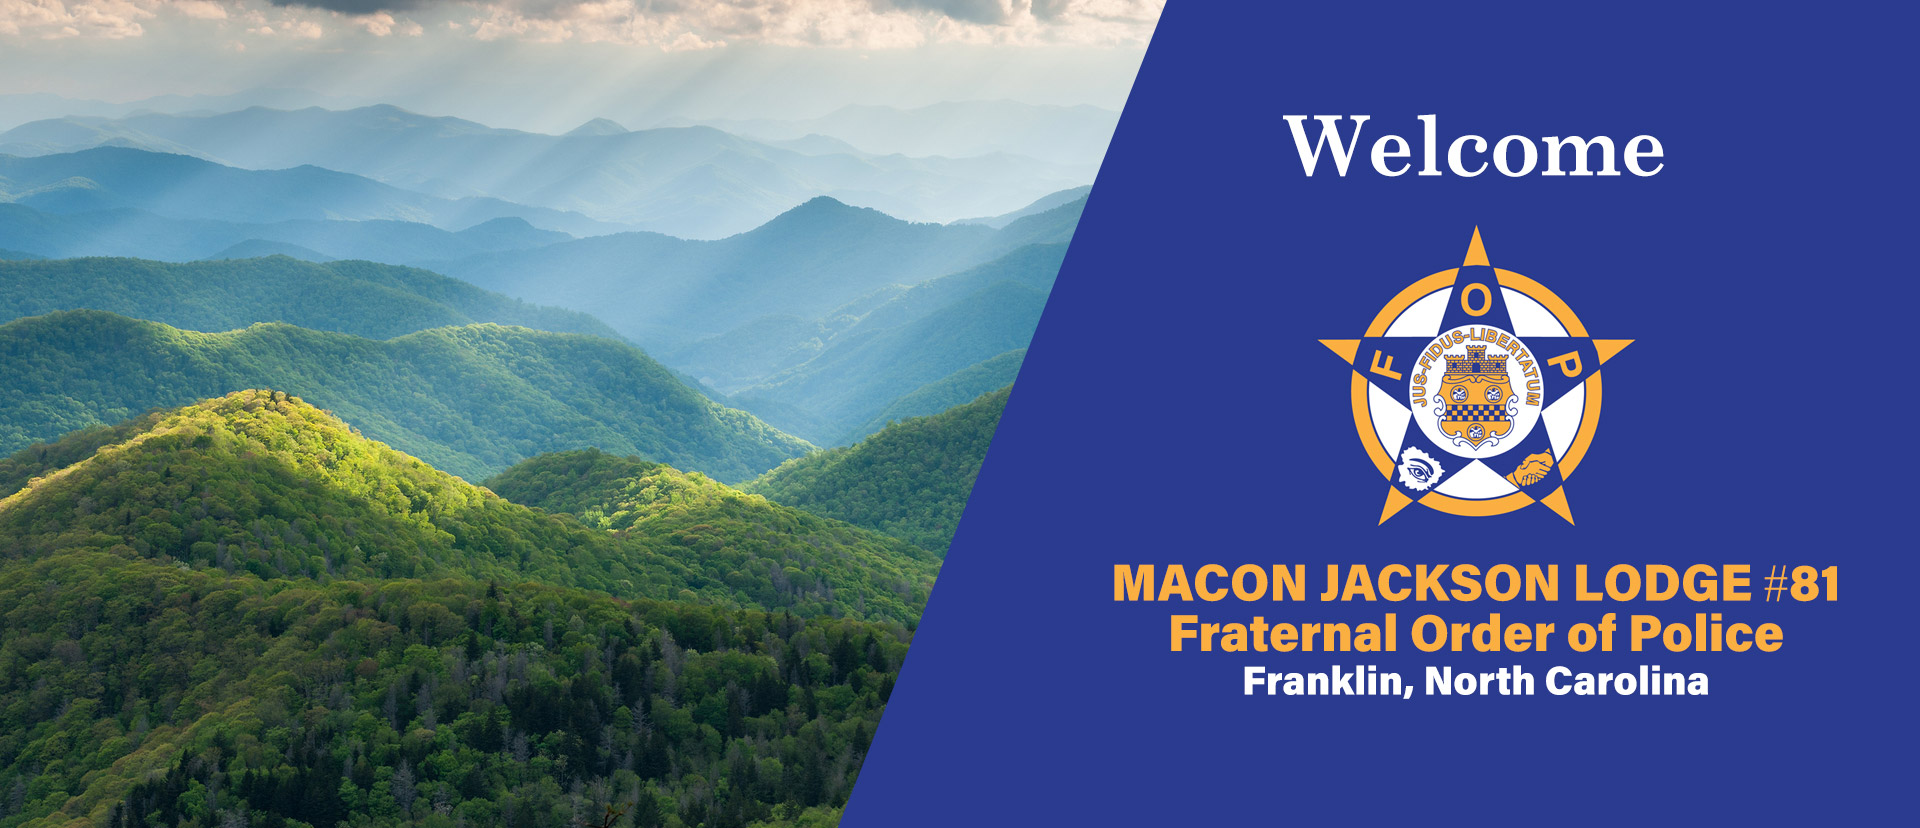 fraternal order of police lodge 81 macon jackson county franklin nc